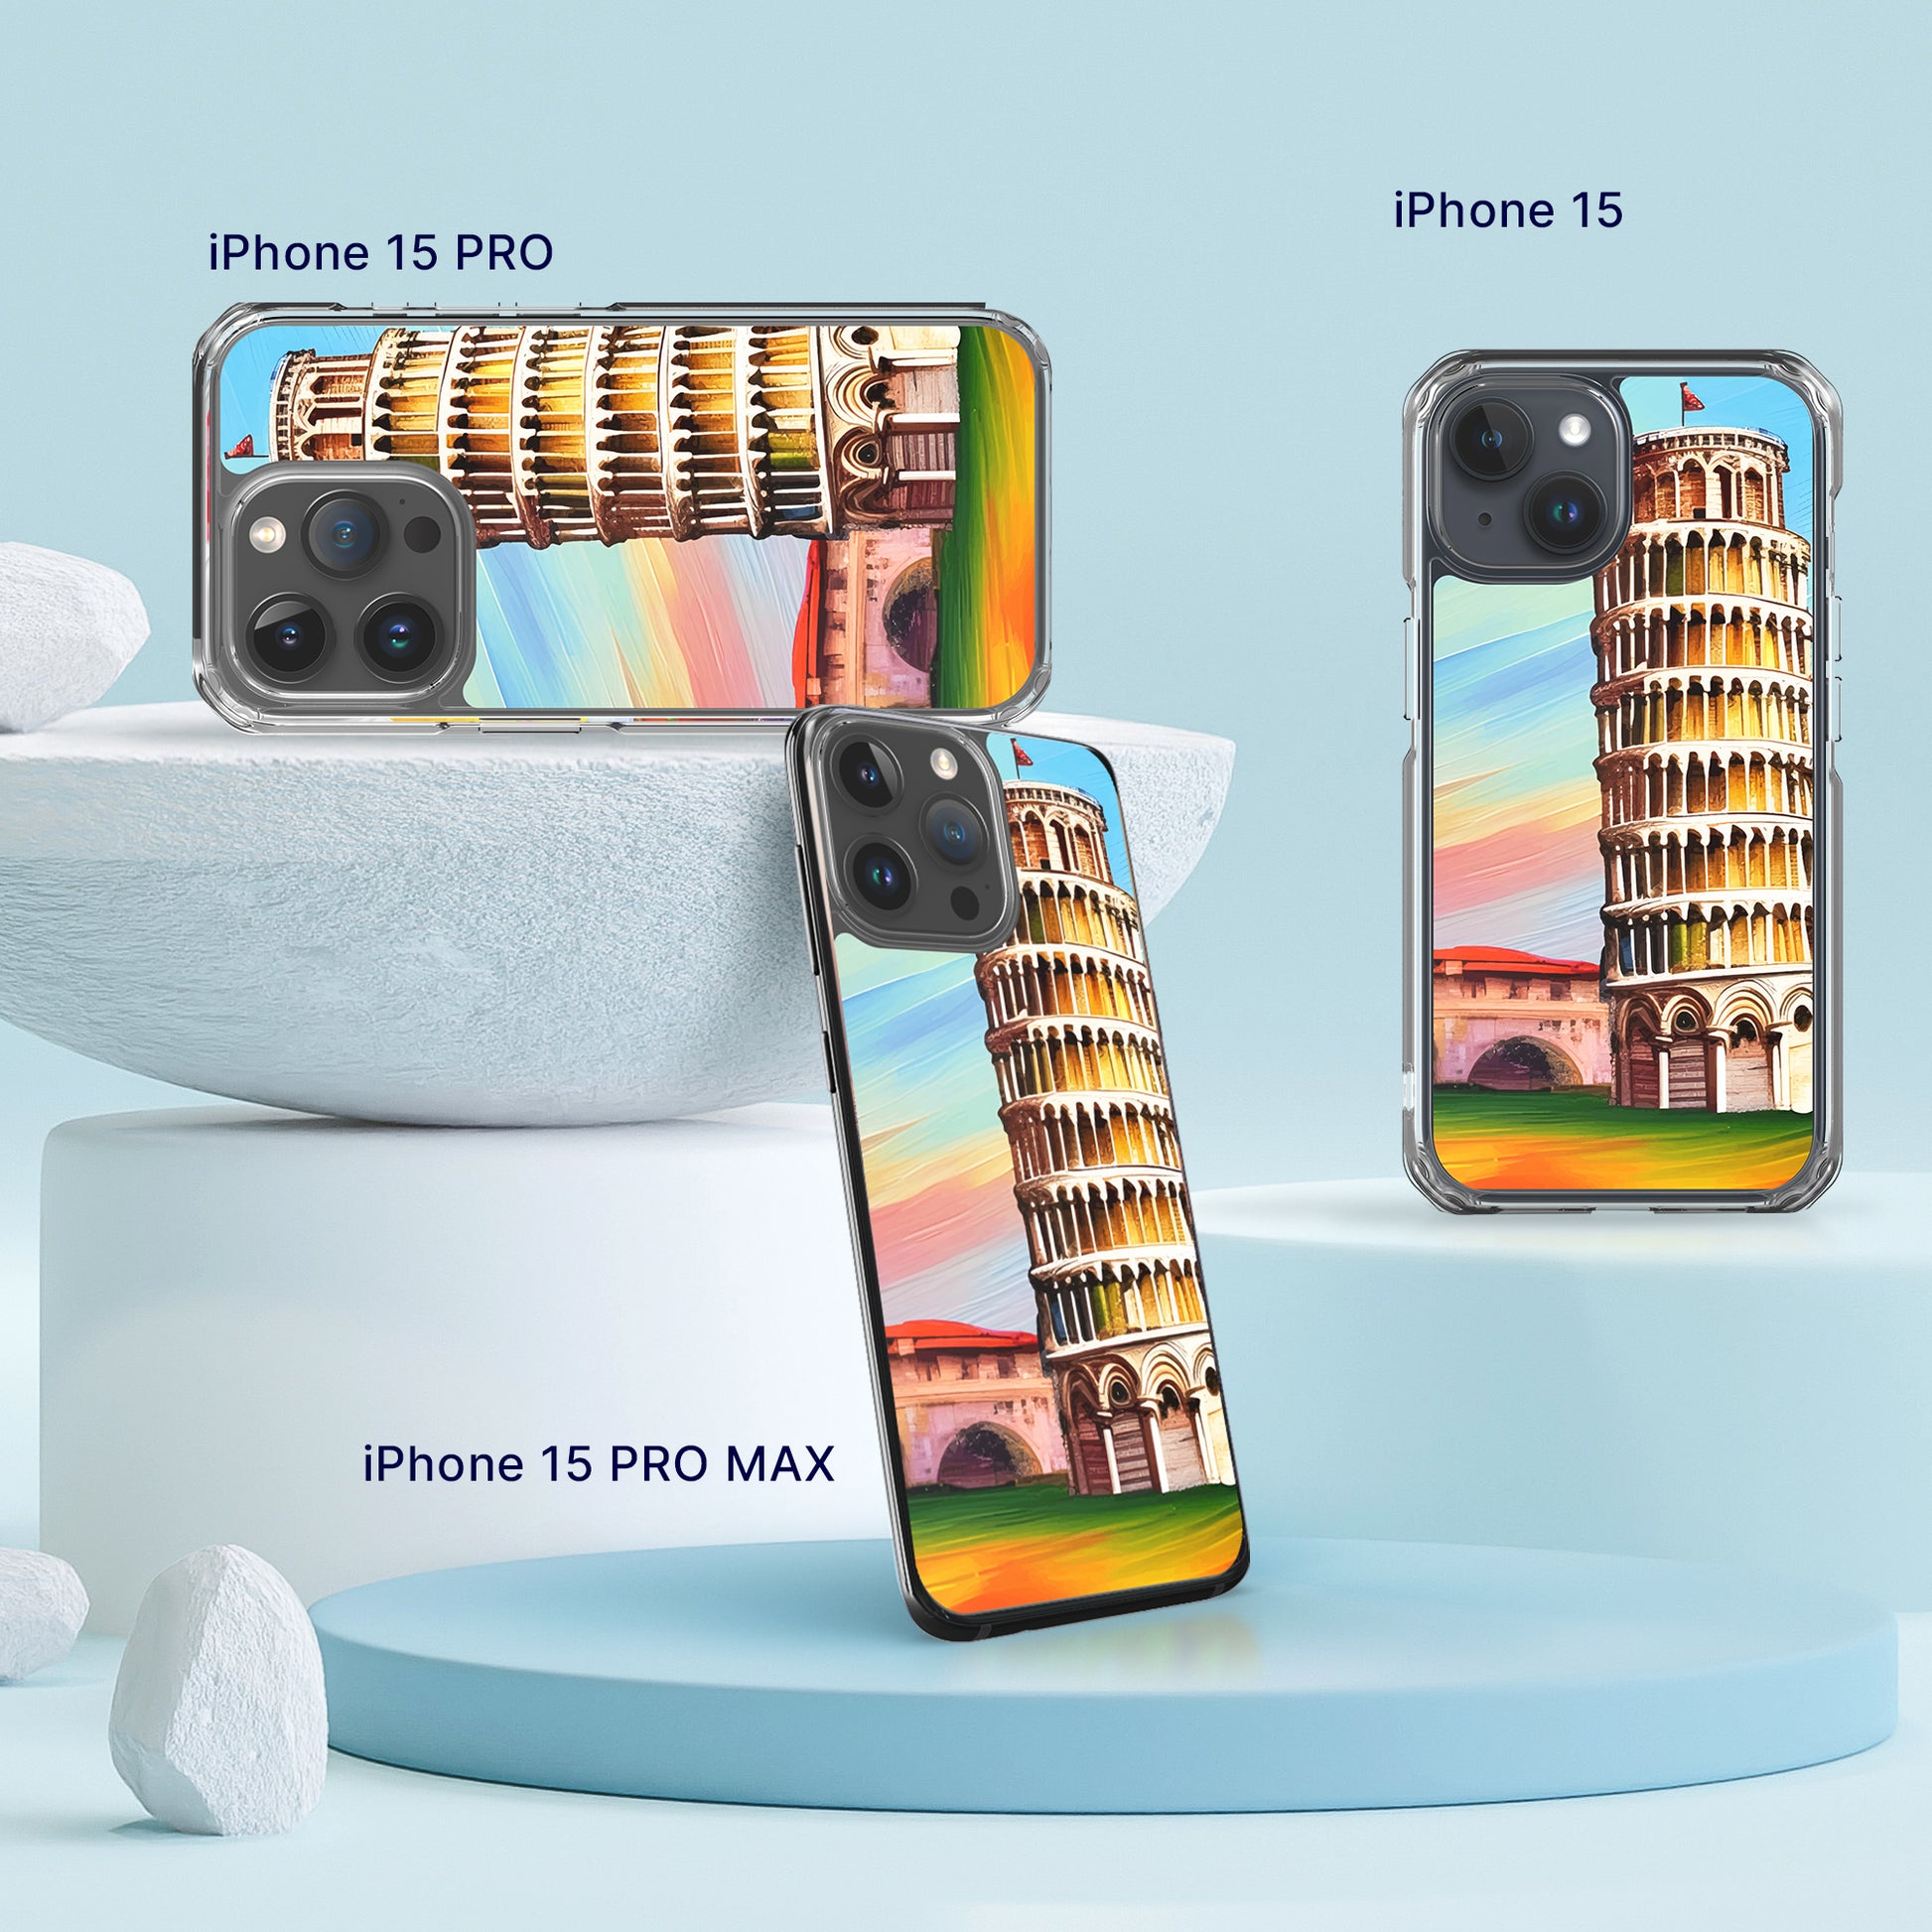 Fashionable iPhone Case with cityscape painting - Paris Louvre| Seepu | 15 PRO, 15, 15 PRO MAX